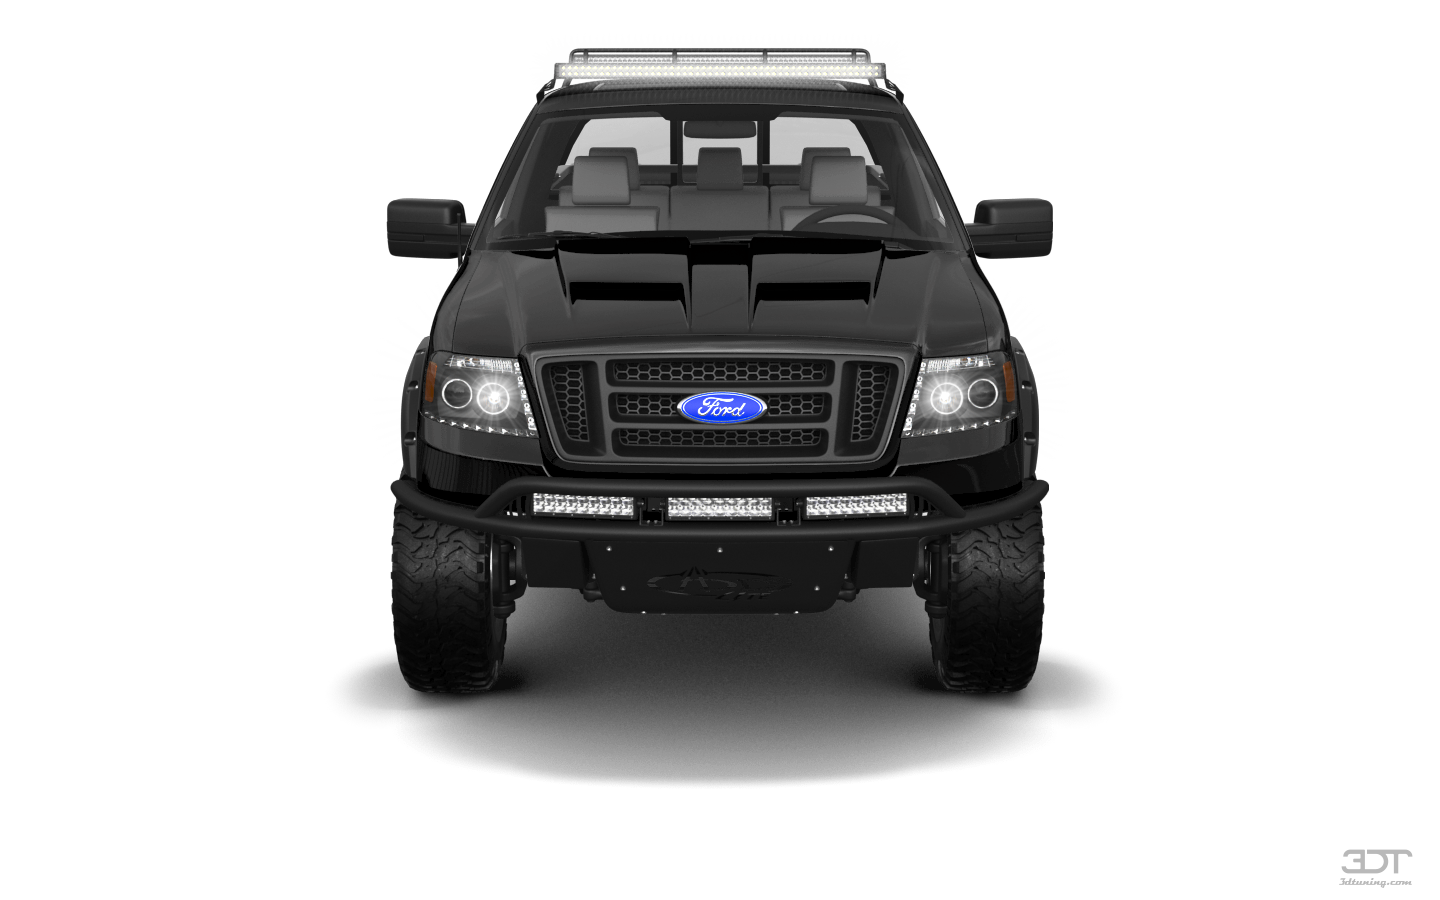 Ford F-150 SuperCab 4 Door pickup truck 2004